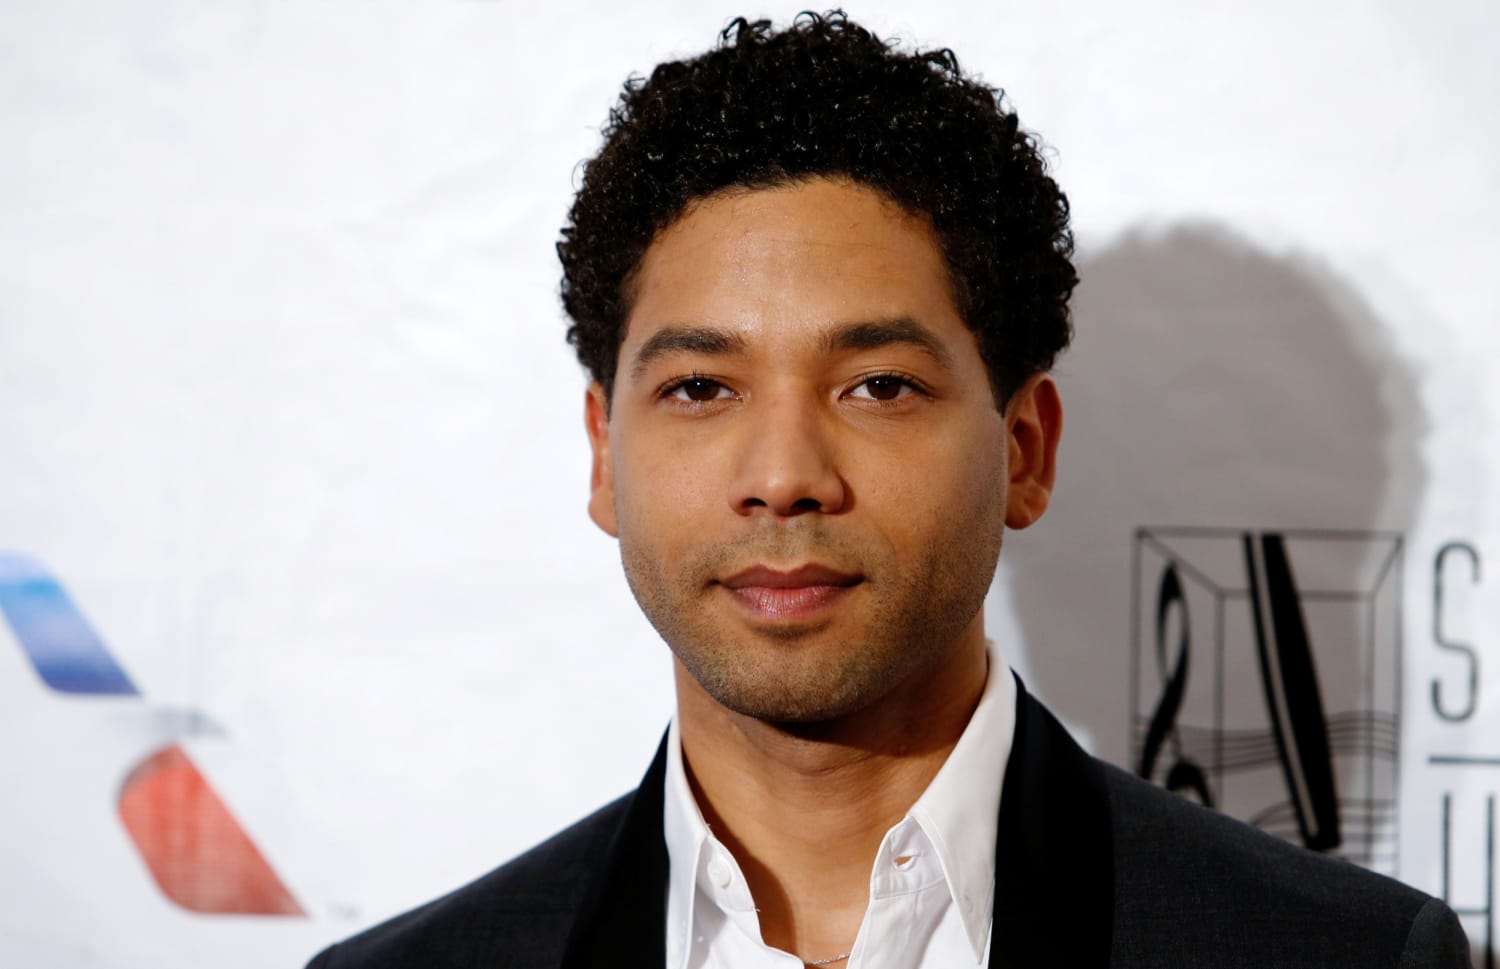 Fox responds to report that Jussie Smollett's scenes on 'Empire' reduced amid ...